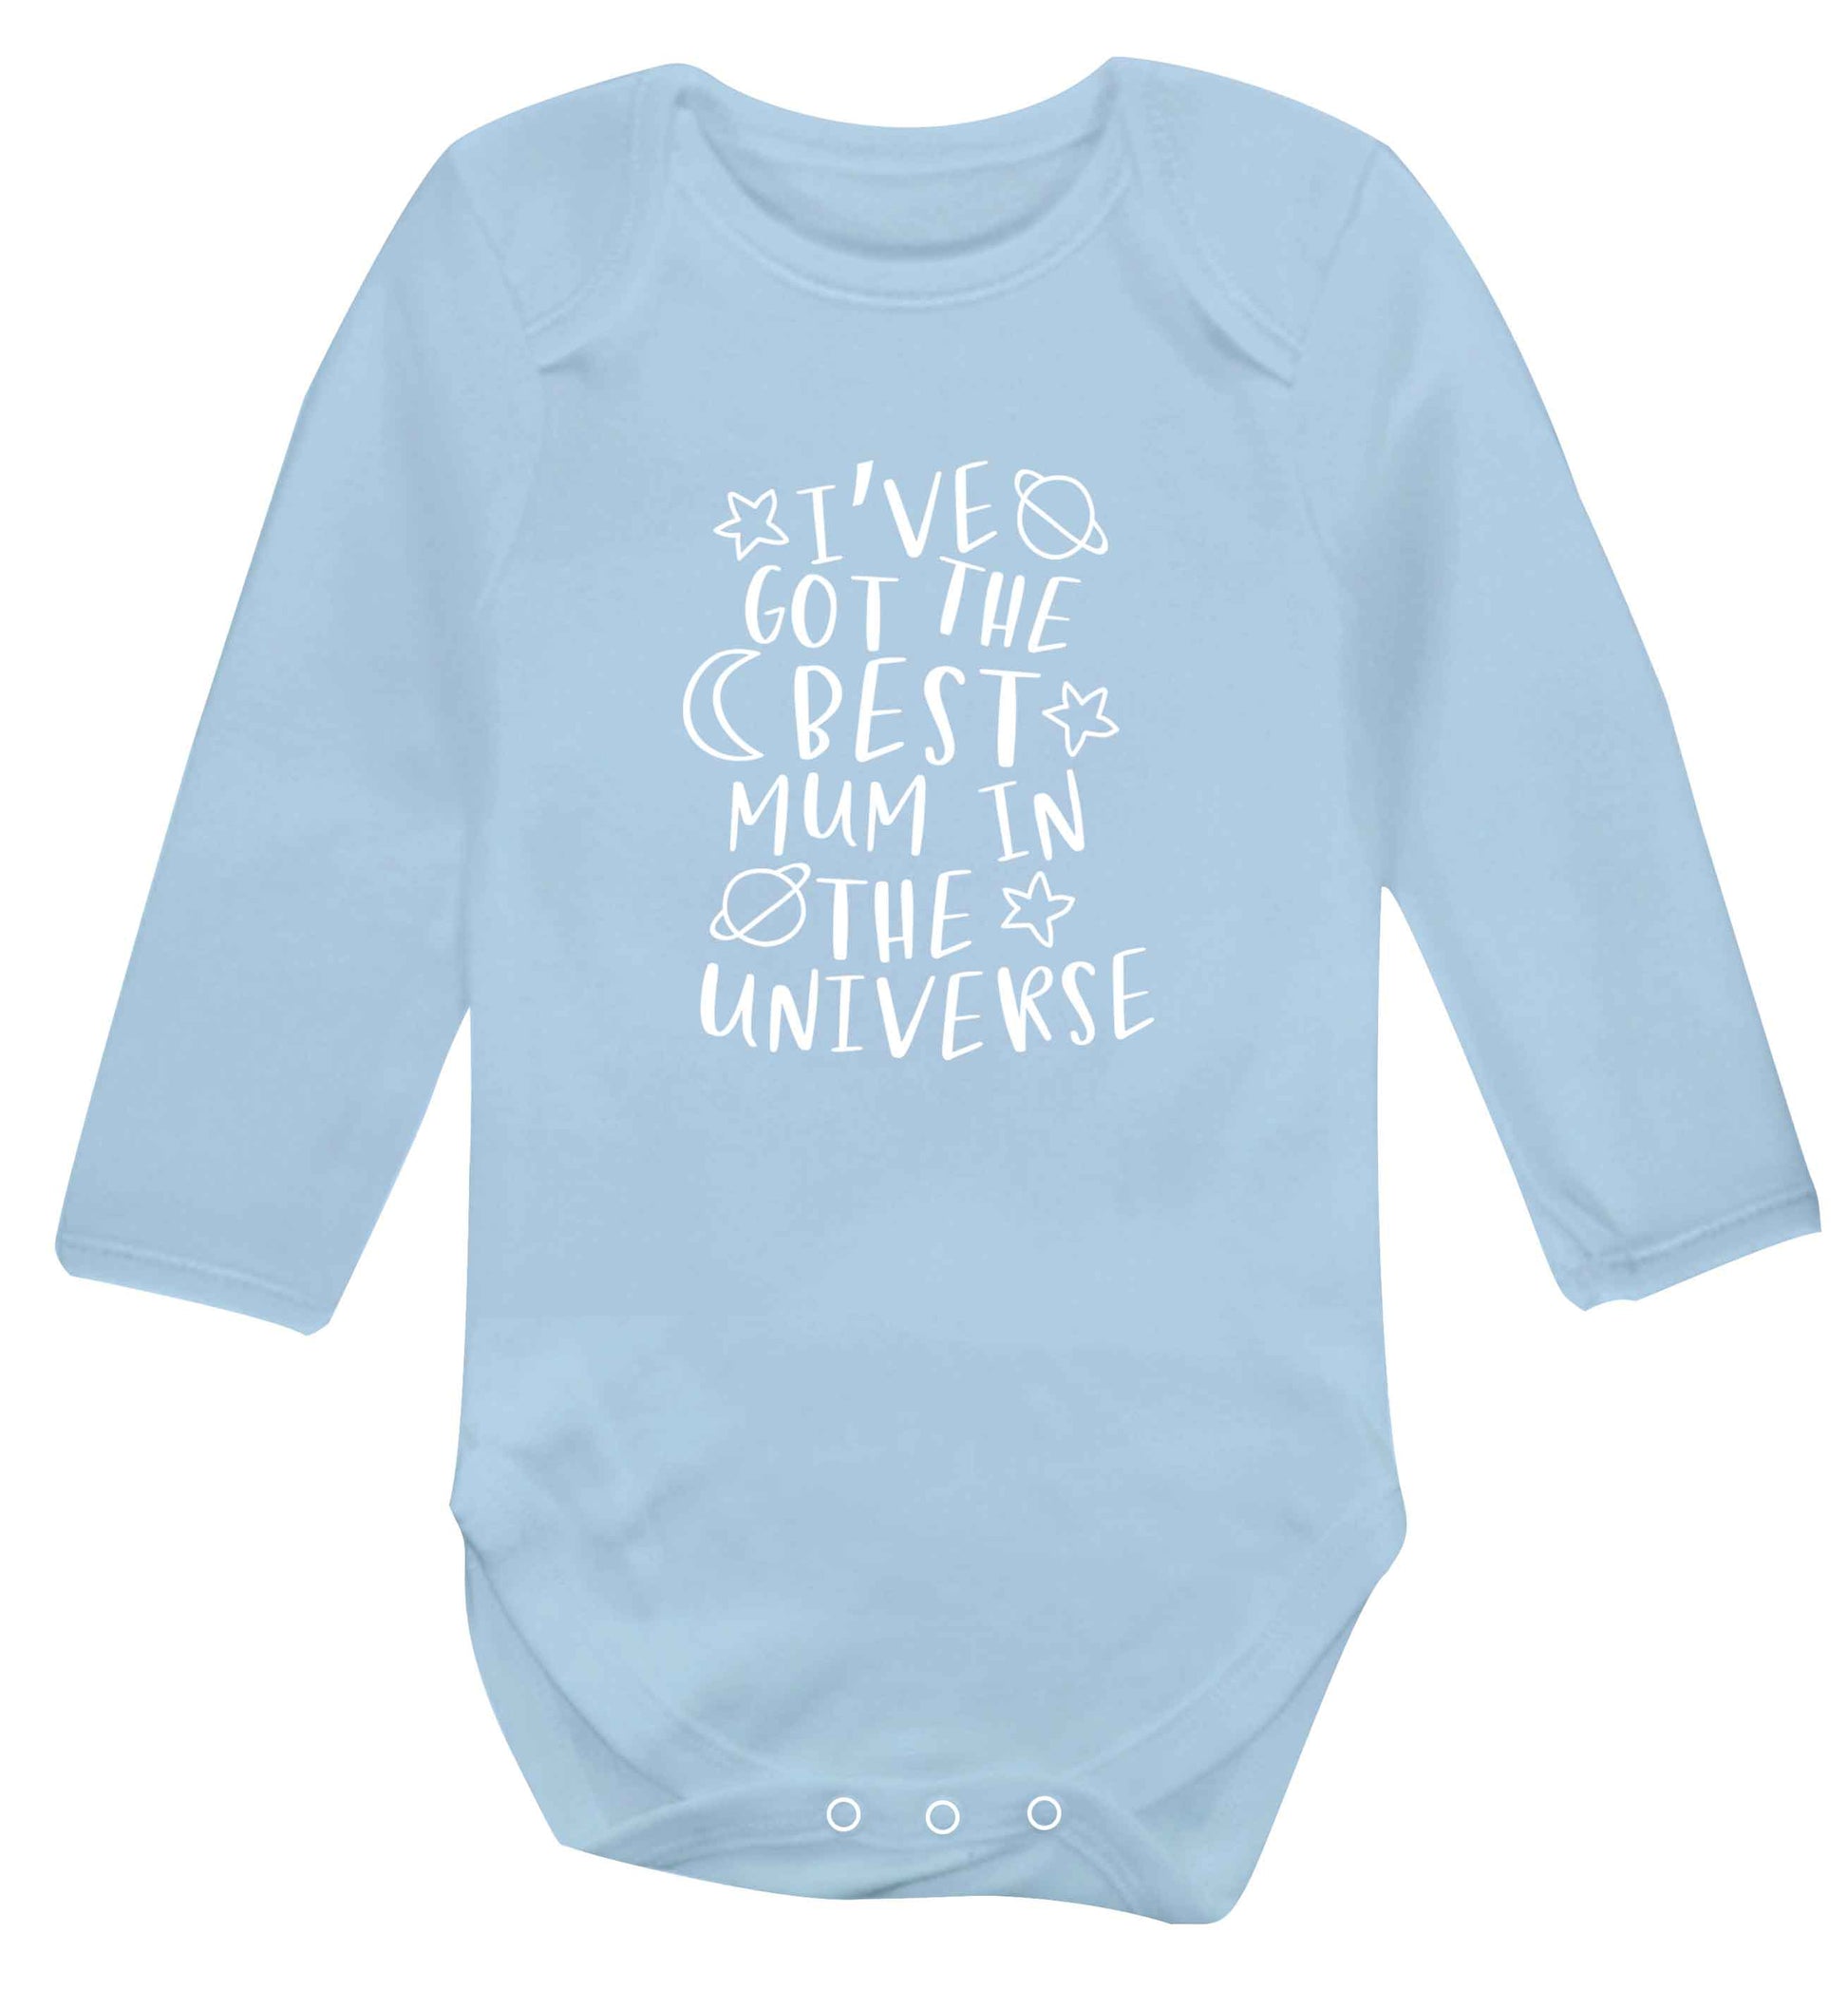 I've got the best mum in the universe baby vest long sleeved pale blue 6-12 months